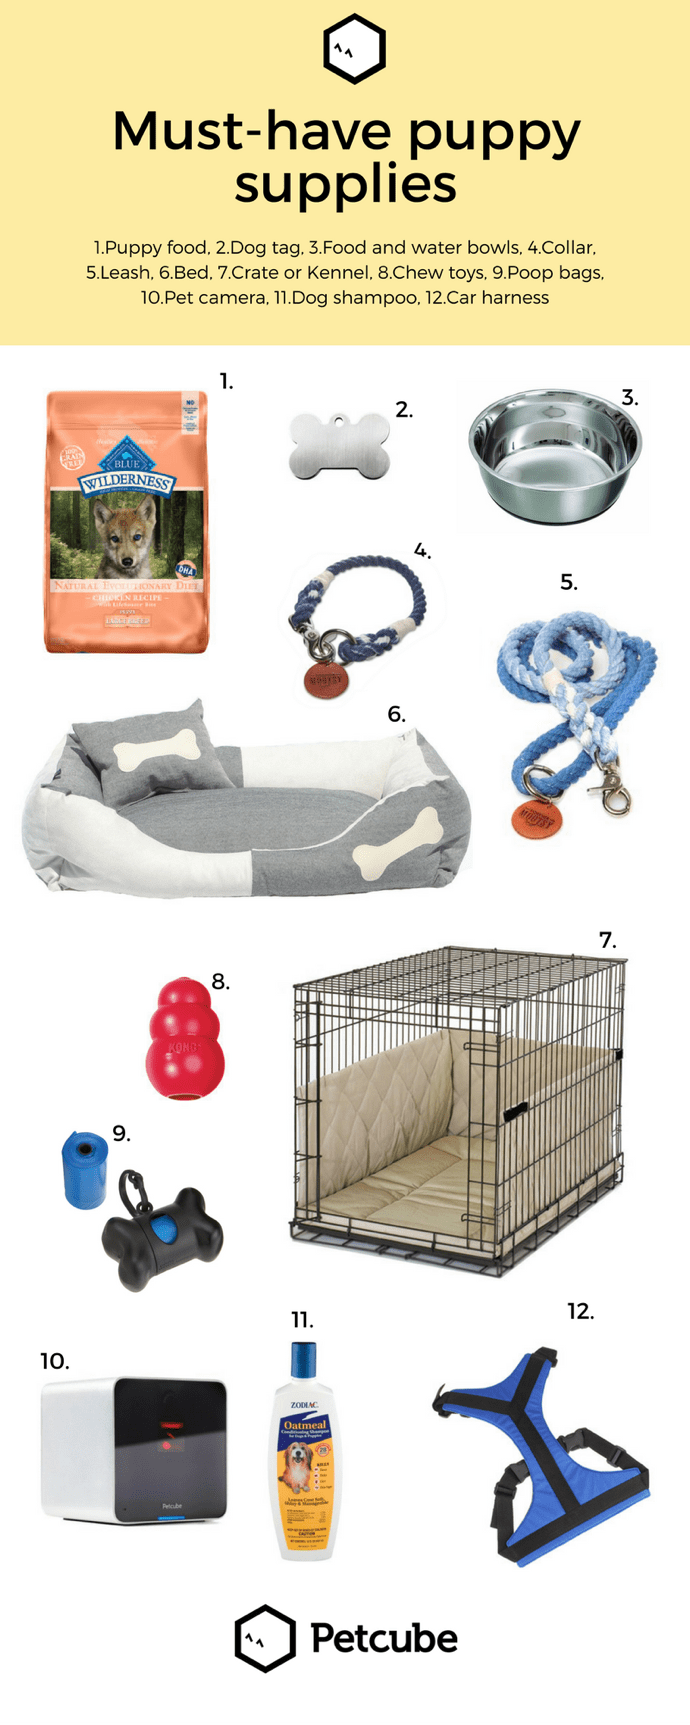 Infographic showing 12 must-have puppy supplies